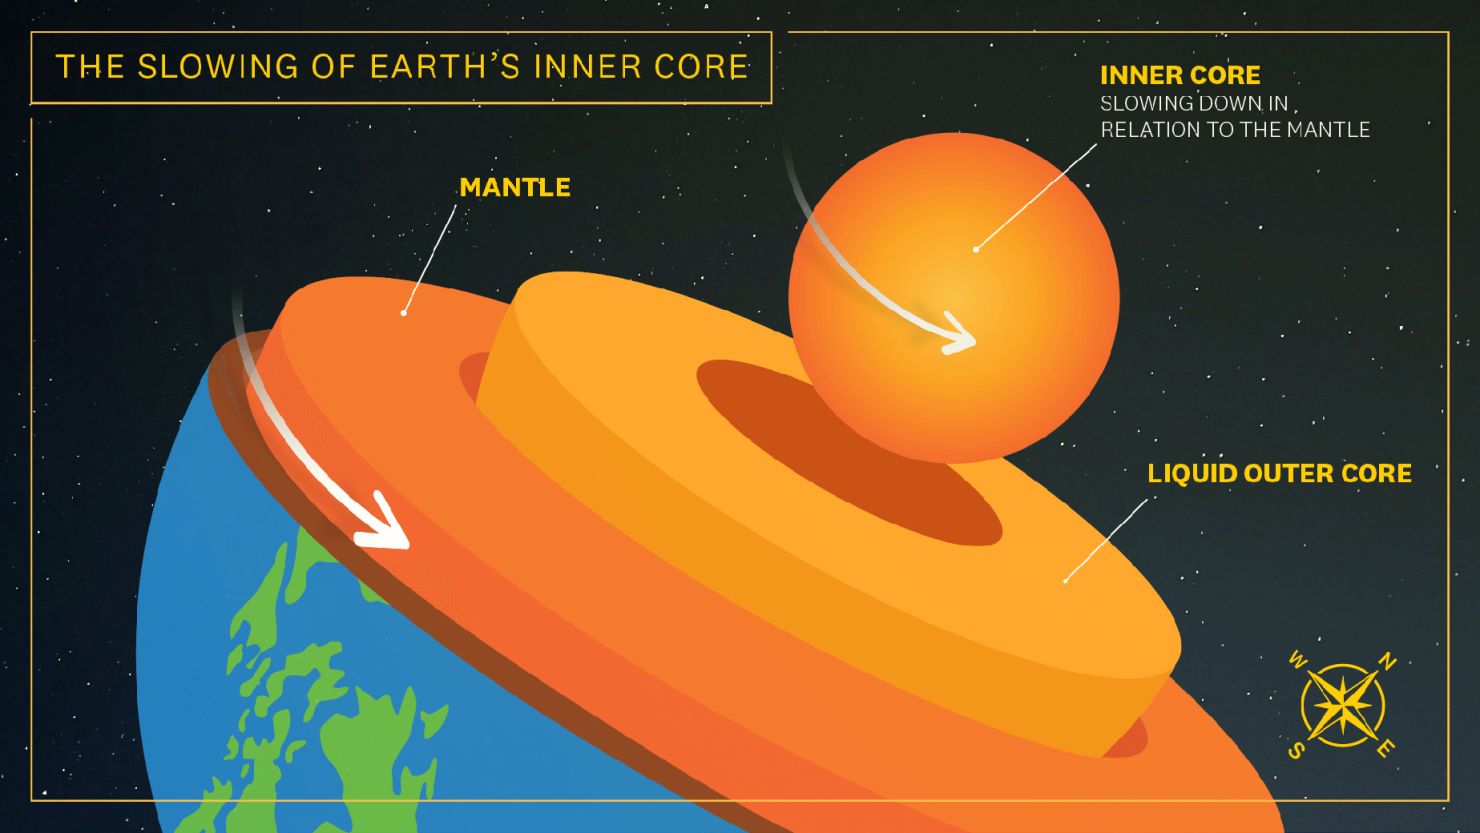 New research confirms the rotation of Earth's inner core has been slowing down as part of a decades-long pattern. How this slowdown might affect our planet remains an open question.